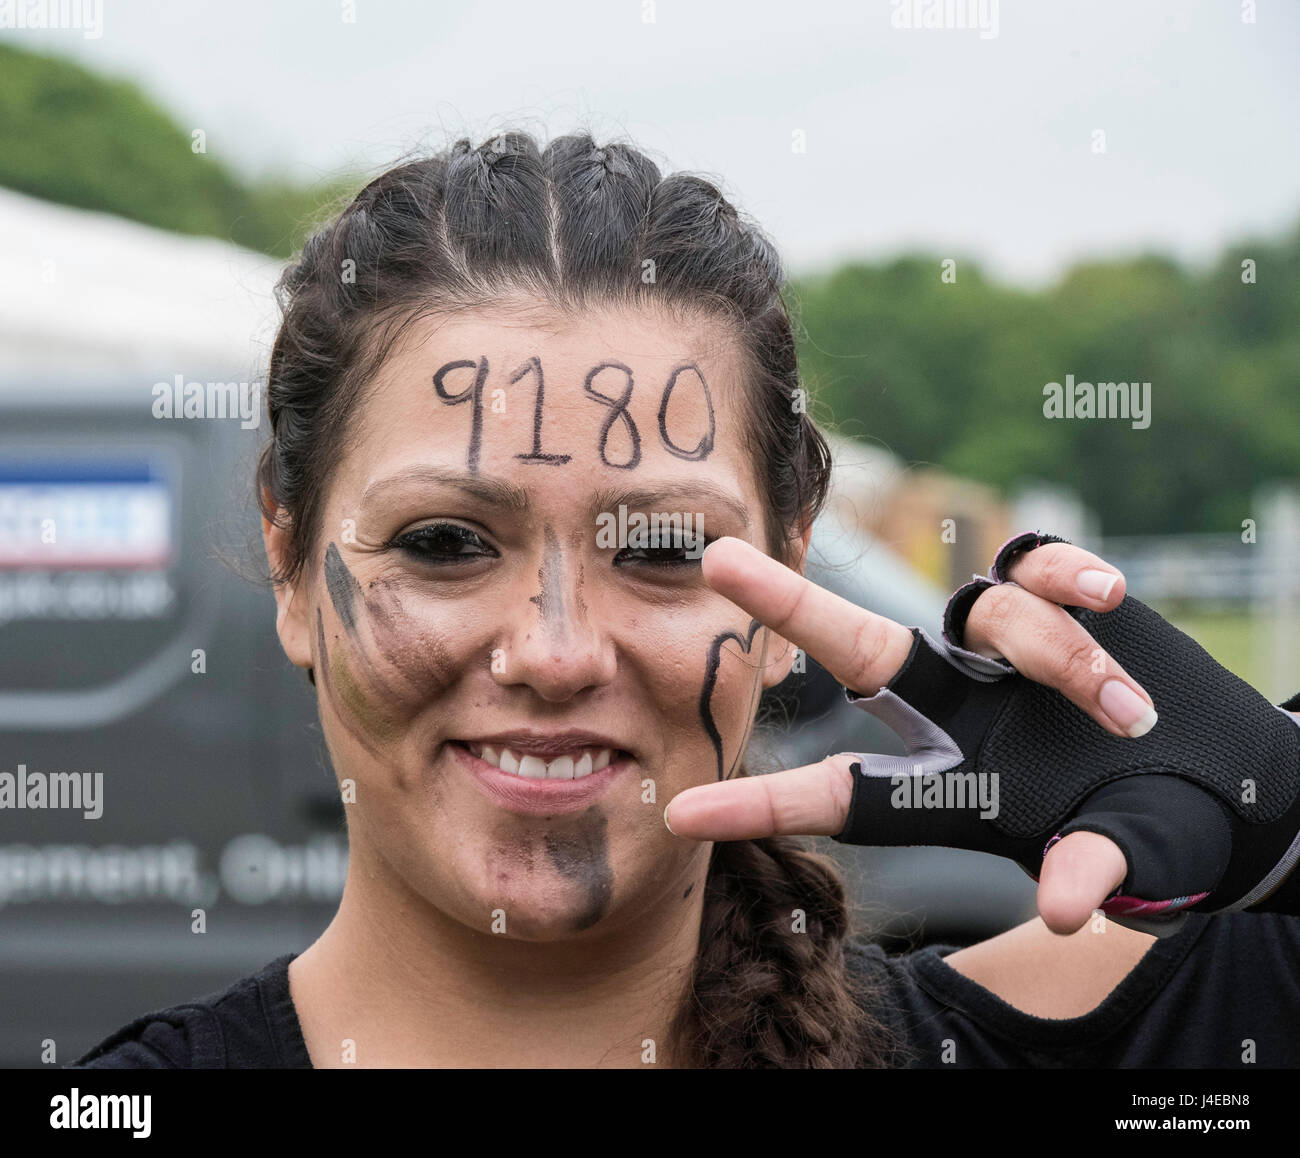 Brentwood, Essex, 13th May 2017; participant in the, Nuclear Blast race, Brentwood, Essex Credit: Ian Davidson/Alamy Live News Stock Photo